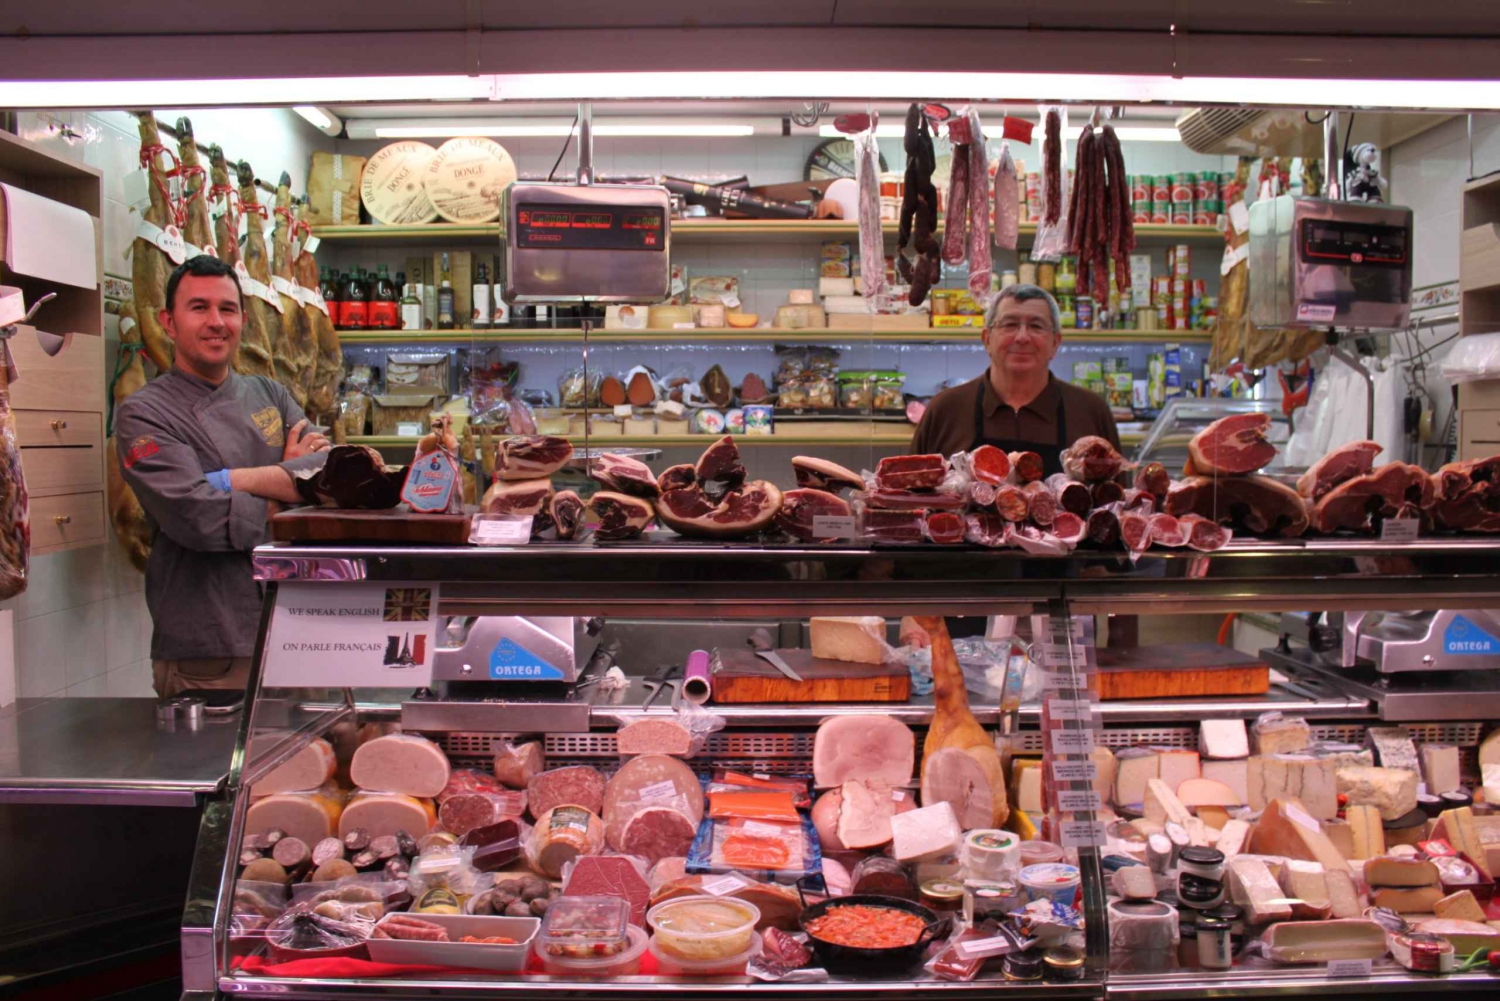 Alicante: Old Town and Market Gastronomic Tour with Tastings